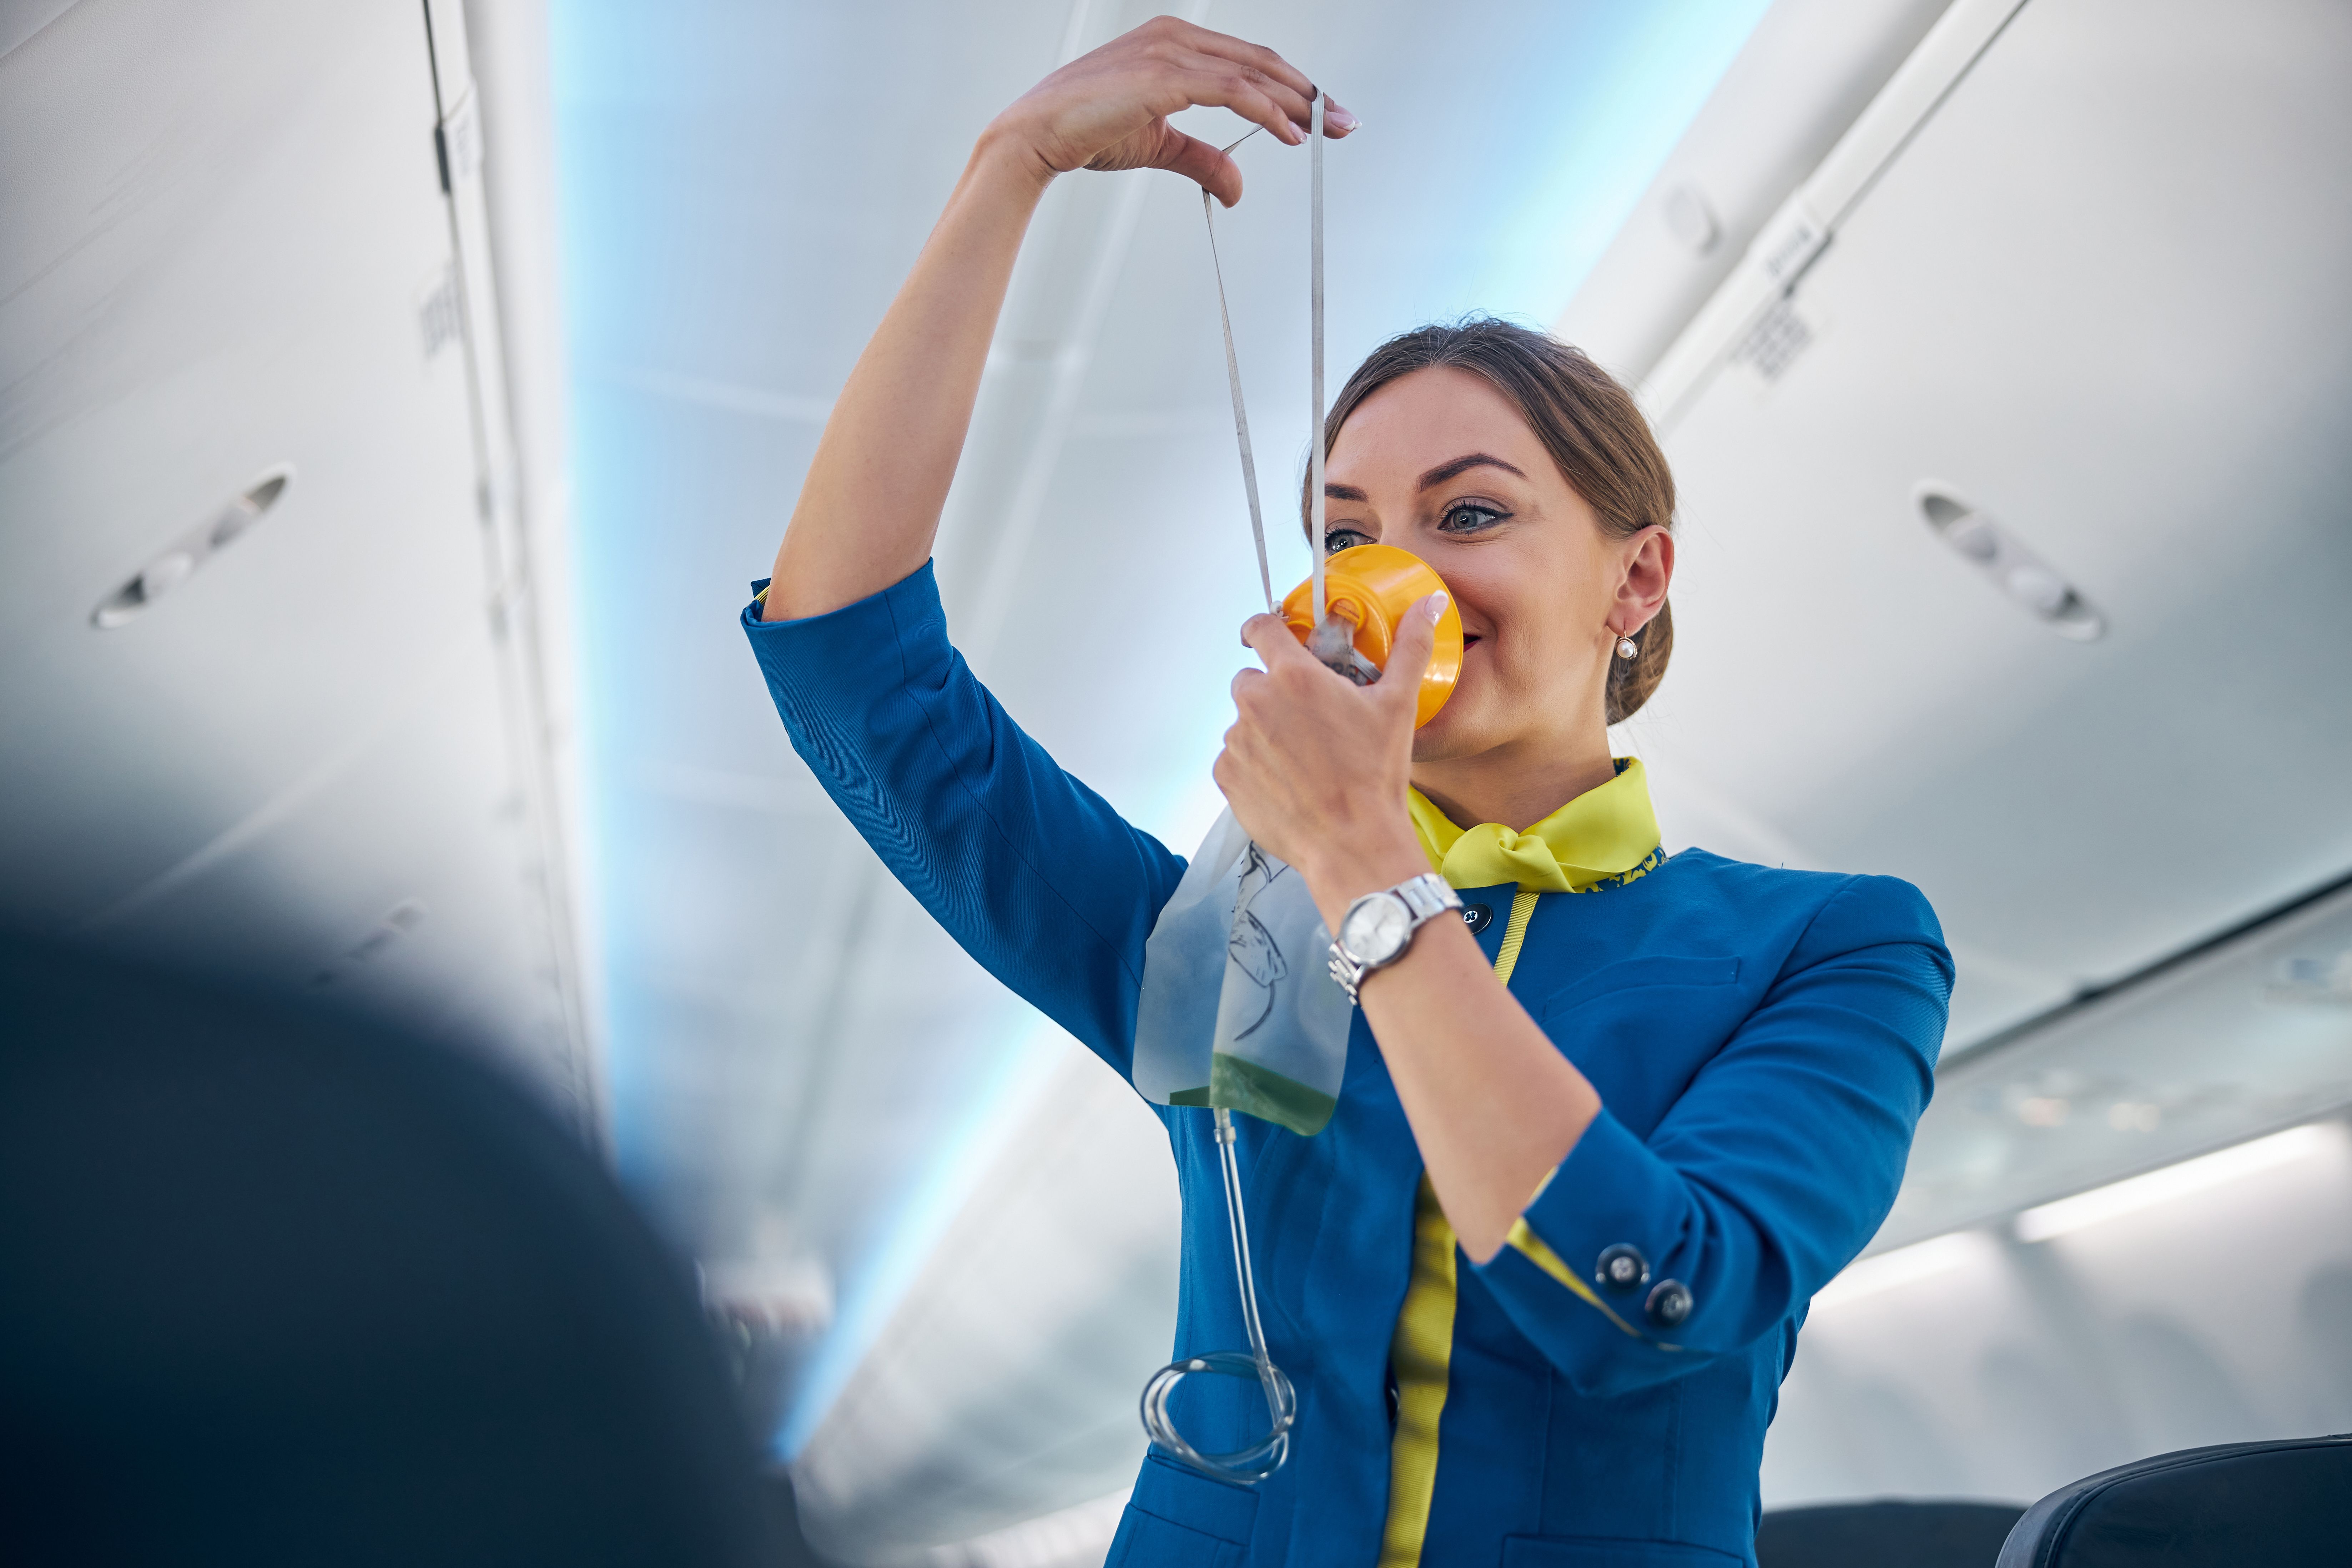 A flight attendant will demonstrate how to put on an oxygen mask.